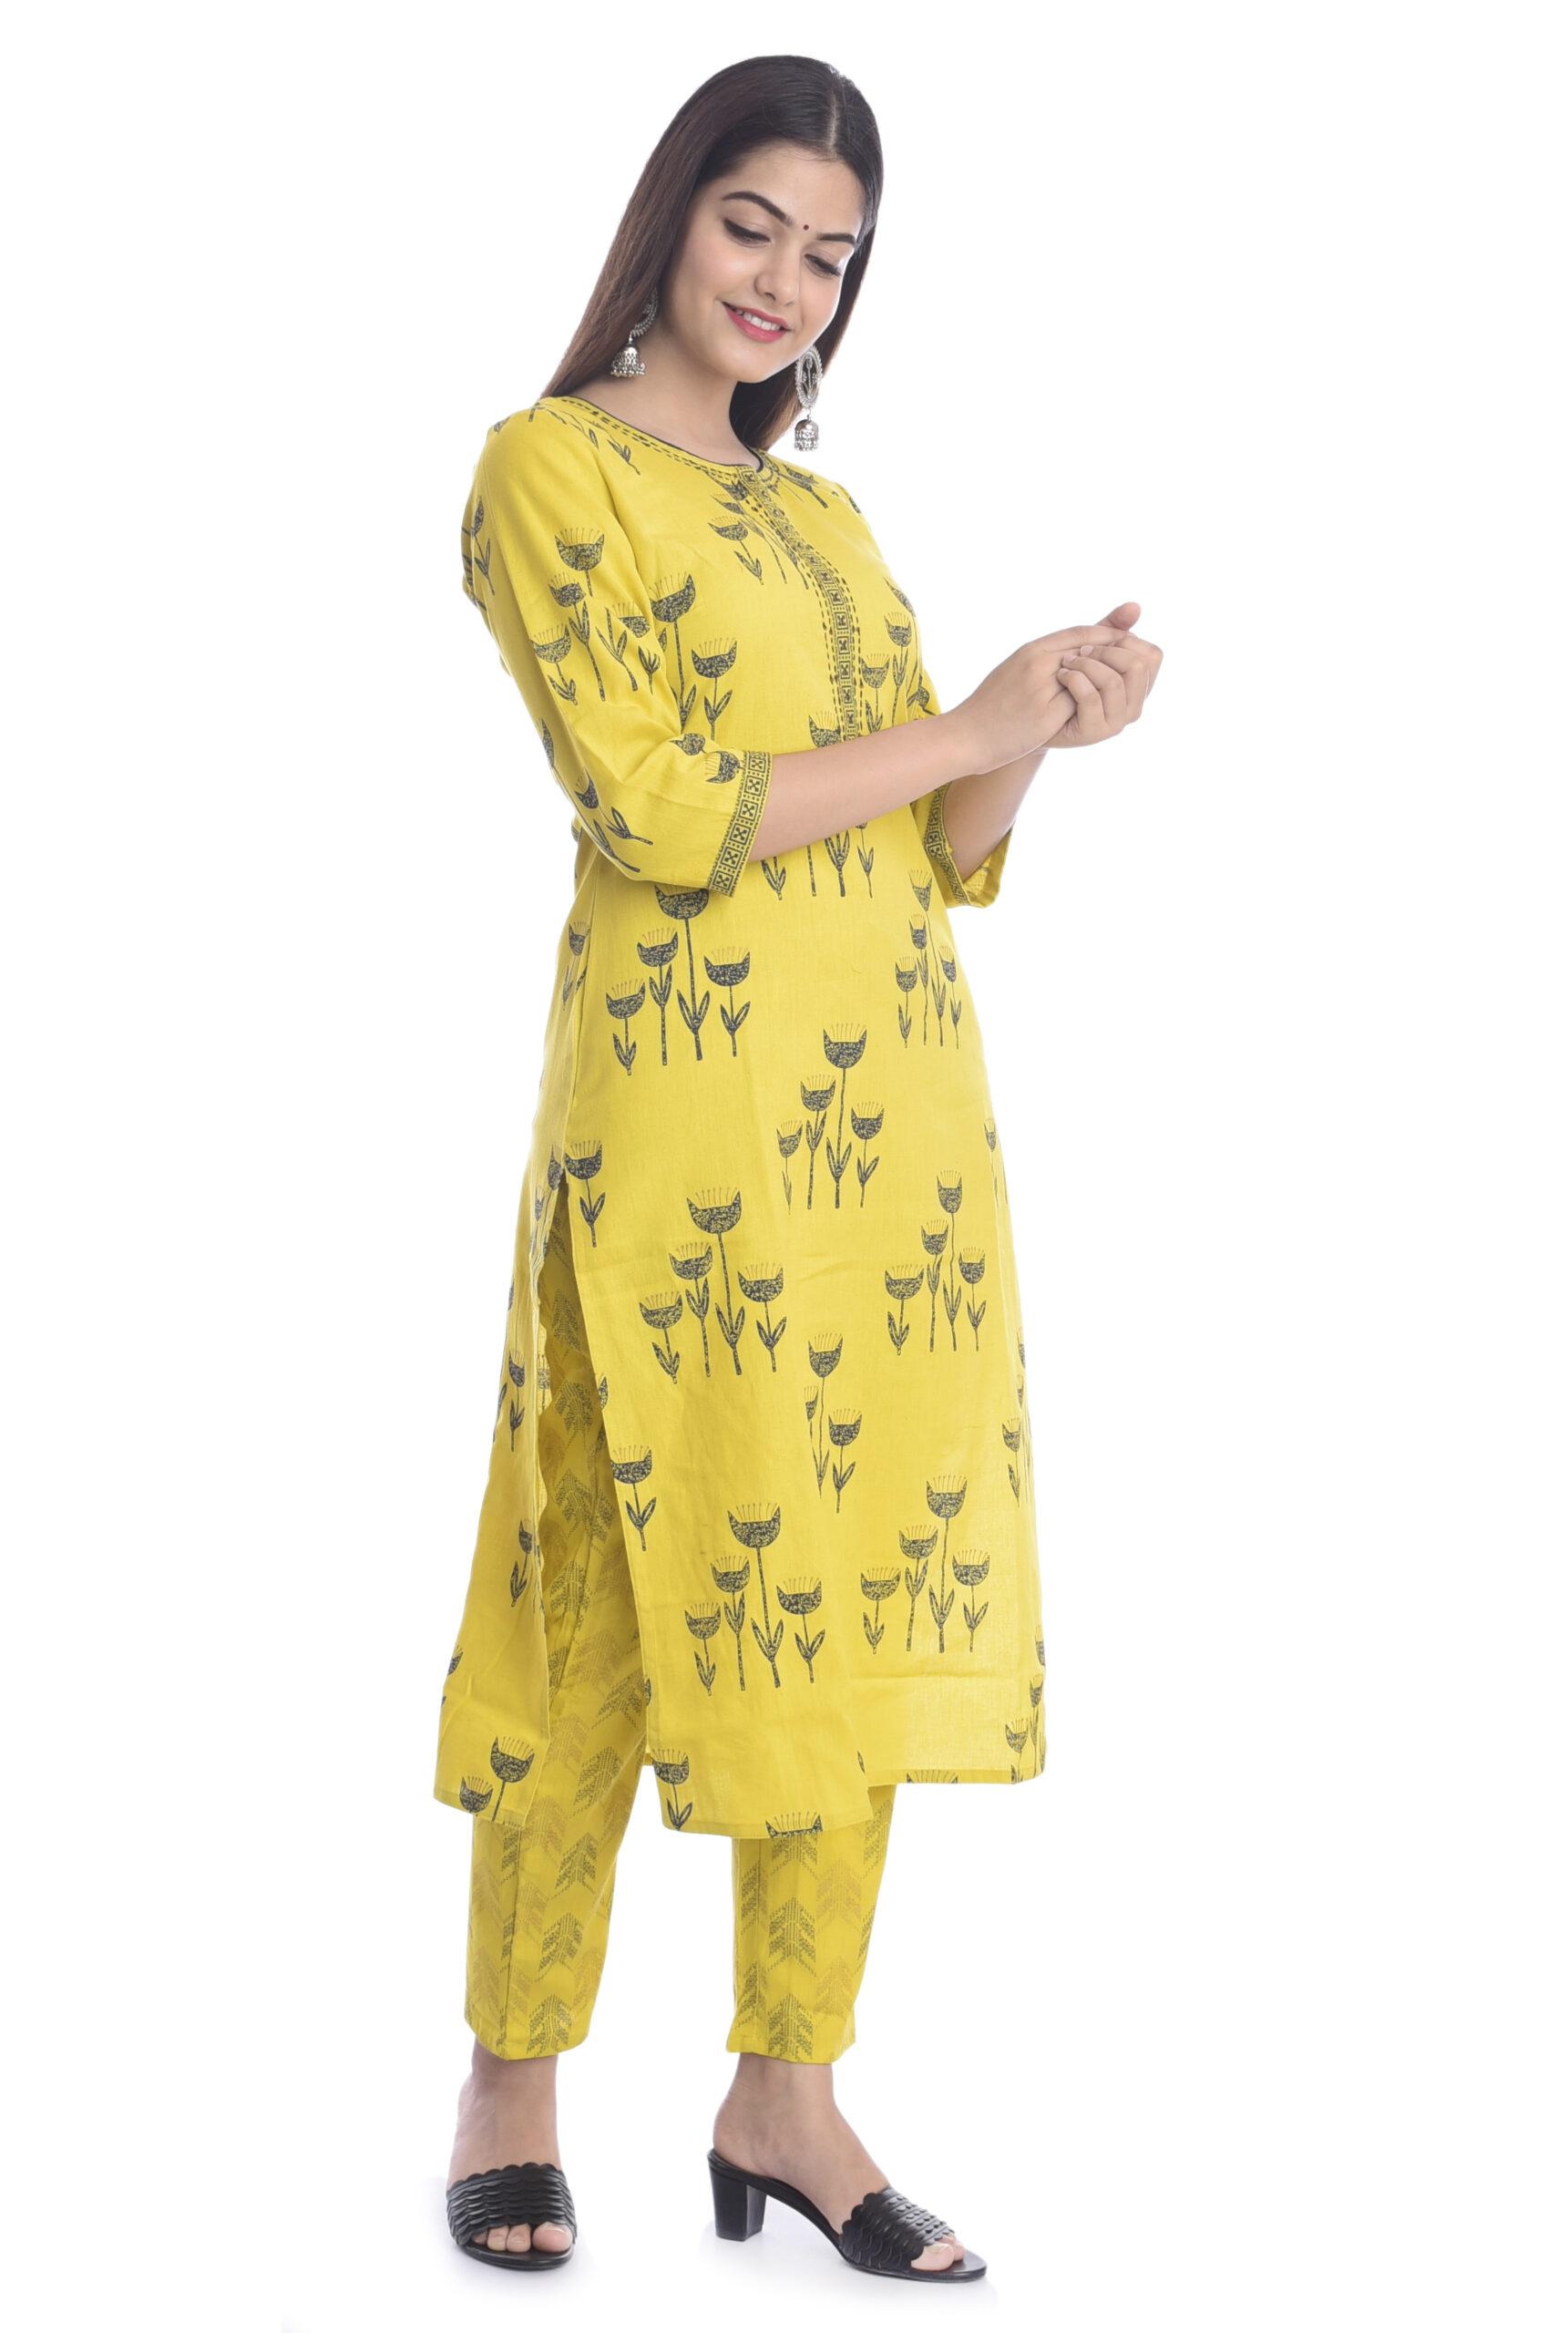 Buy Kurtis Online - 🌼KURTA SHARARA MIRROR WORK🌸 🗨️️DM to buy | ₹3̶0̶0̶0̶  ₹1290+Free Delivery 😍 Best Quality Only else Paisa Wapas👍 📦(COD/Returns)  Available✓ 🕐Delivery 6-8 days 😇Trusted Seller ⌚Selling Online From